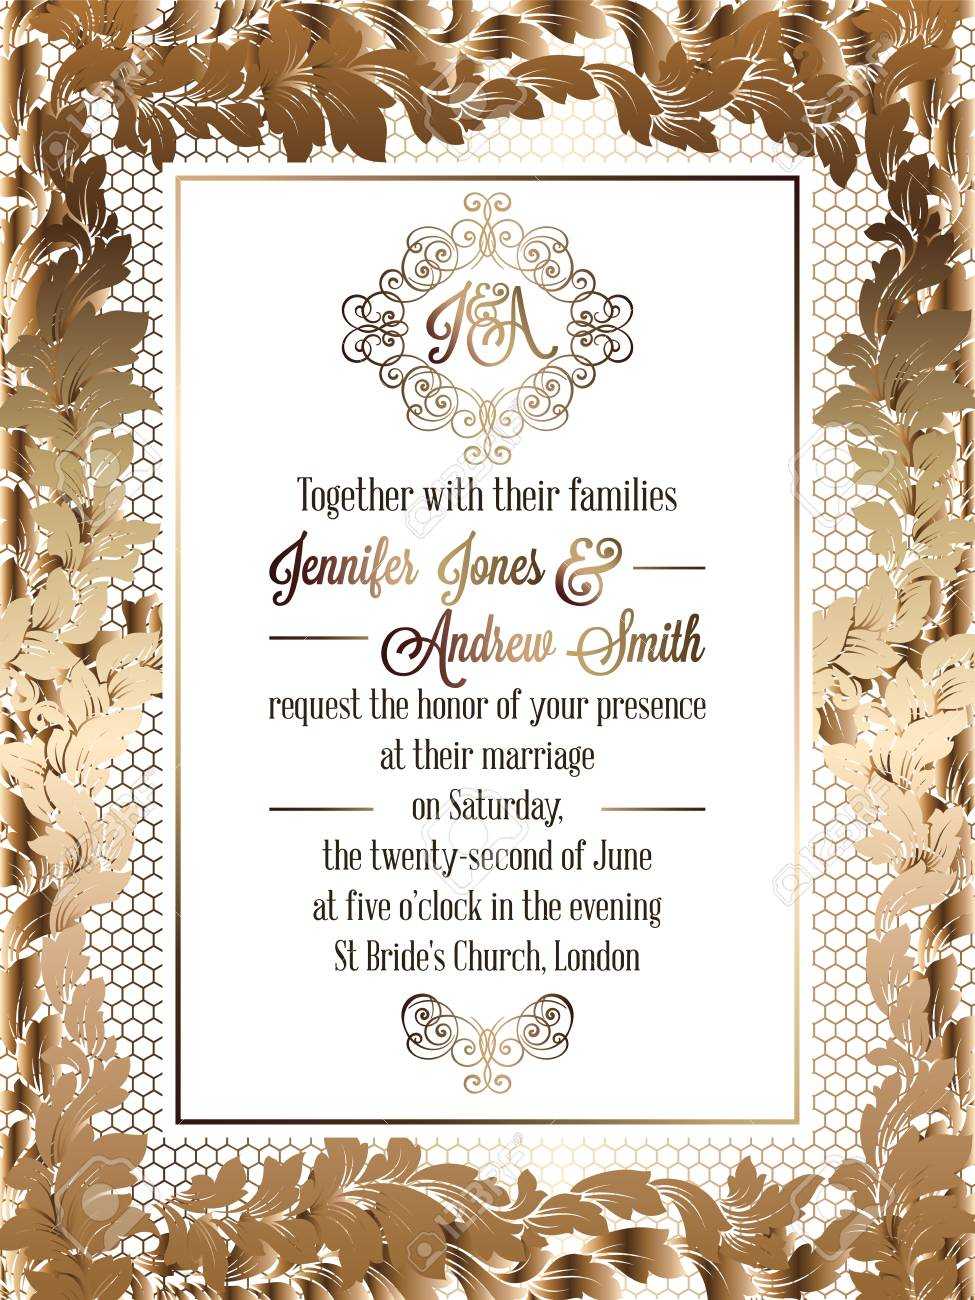 Vintage Baroque Style Wedding Invitation Card Template.. Elegant.. Regarding Invitation Cards Templates For Marriage